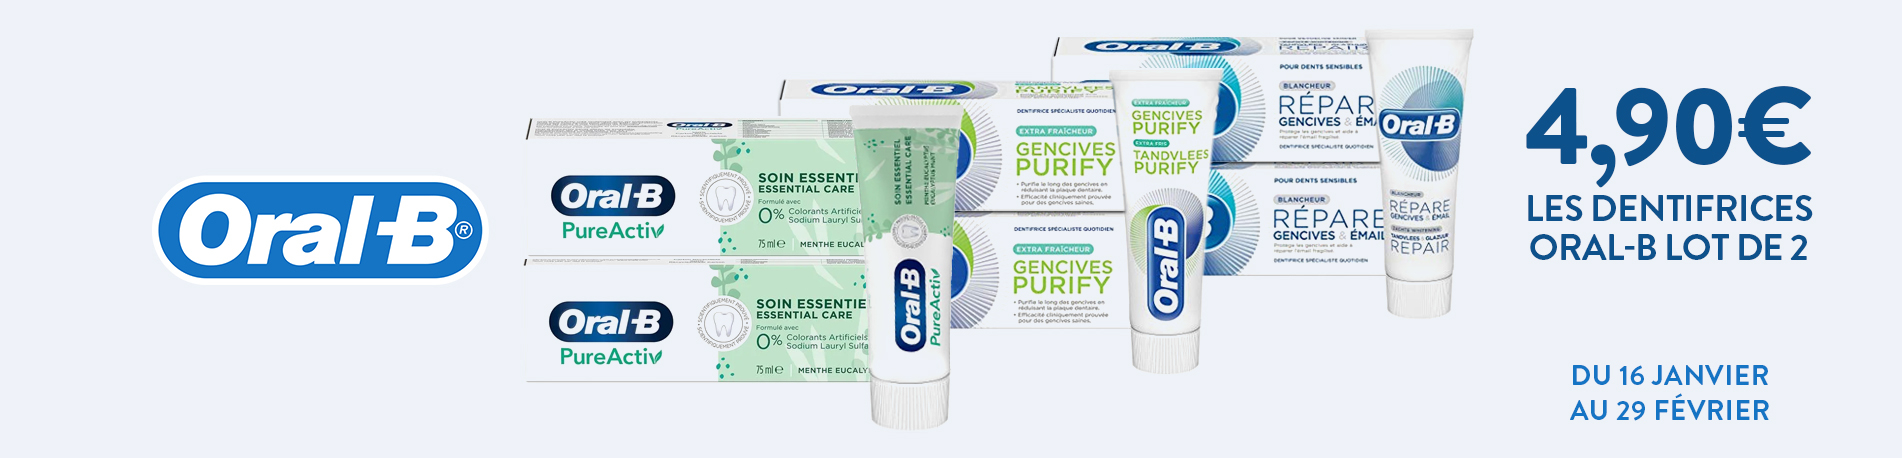 Promotion Dentifrices Oral-B